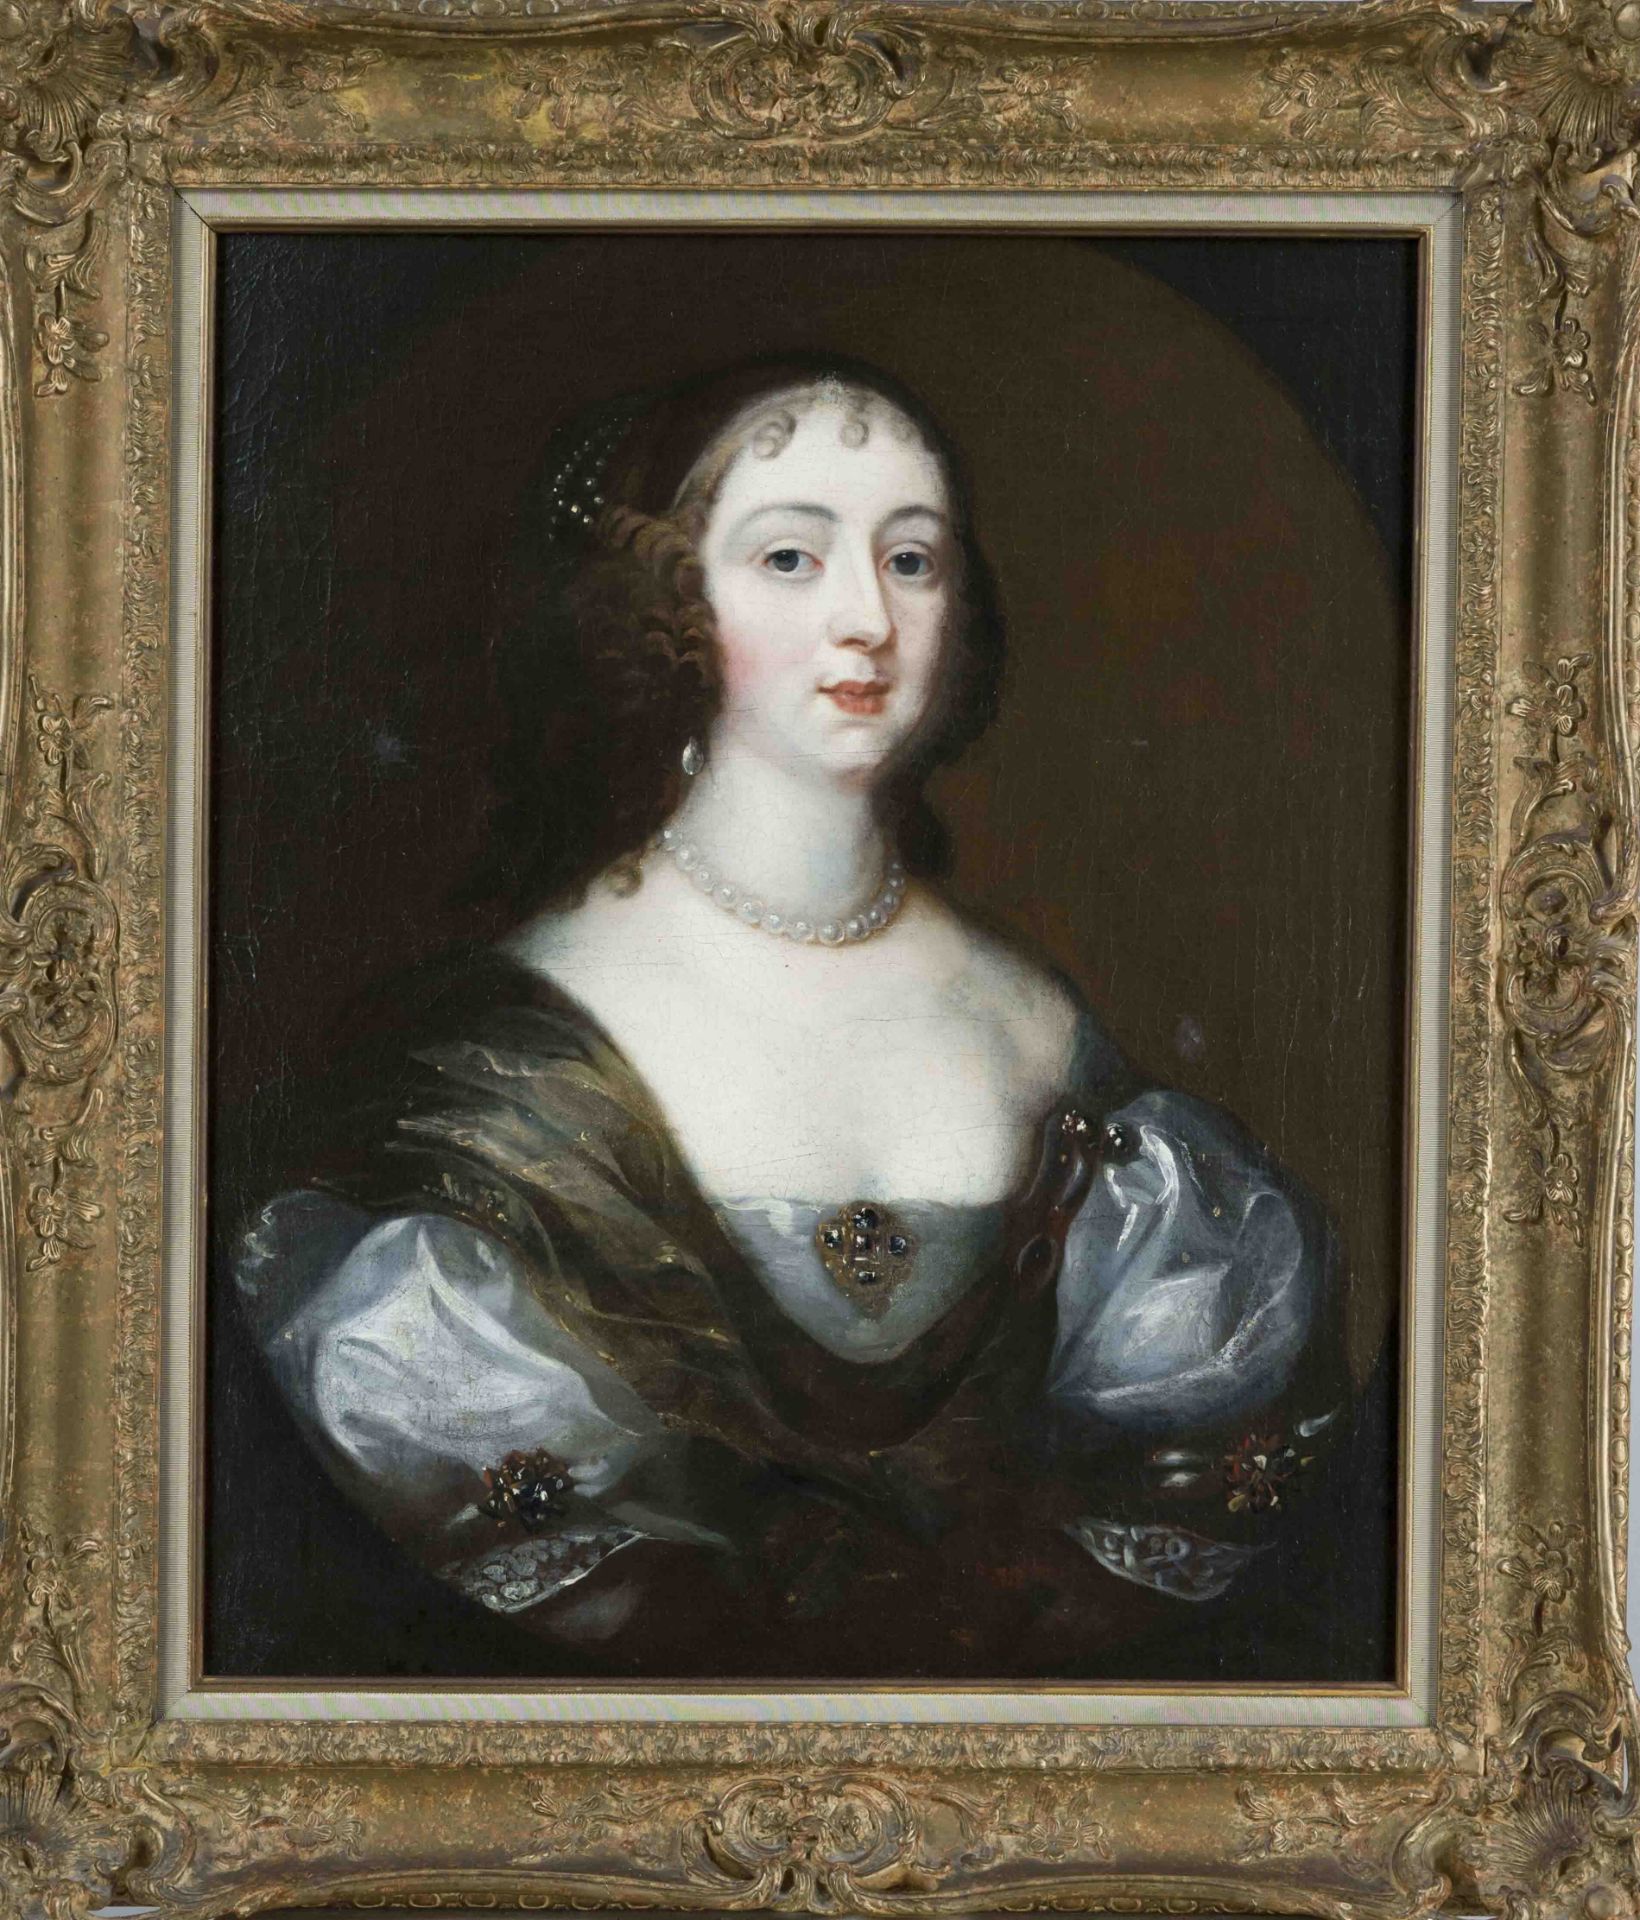 Portrait painter of the 18th century, Portrait of a lady with a pearl necklace, oil on canvas,